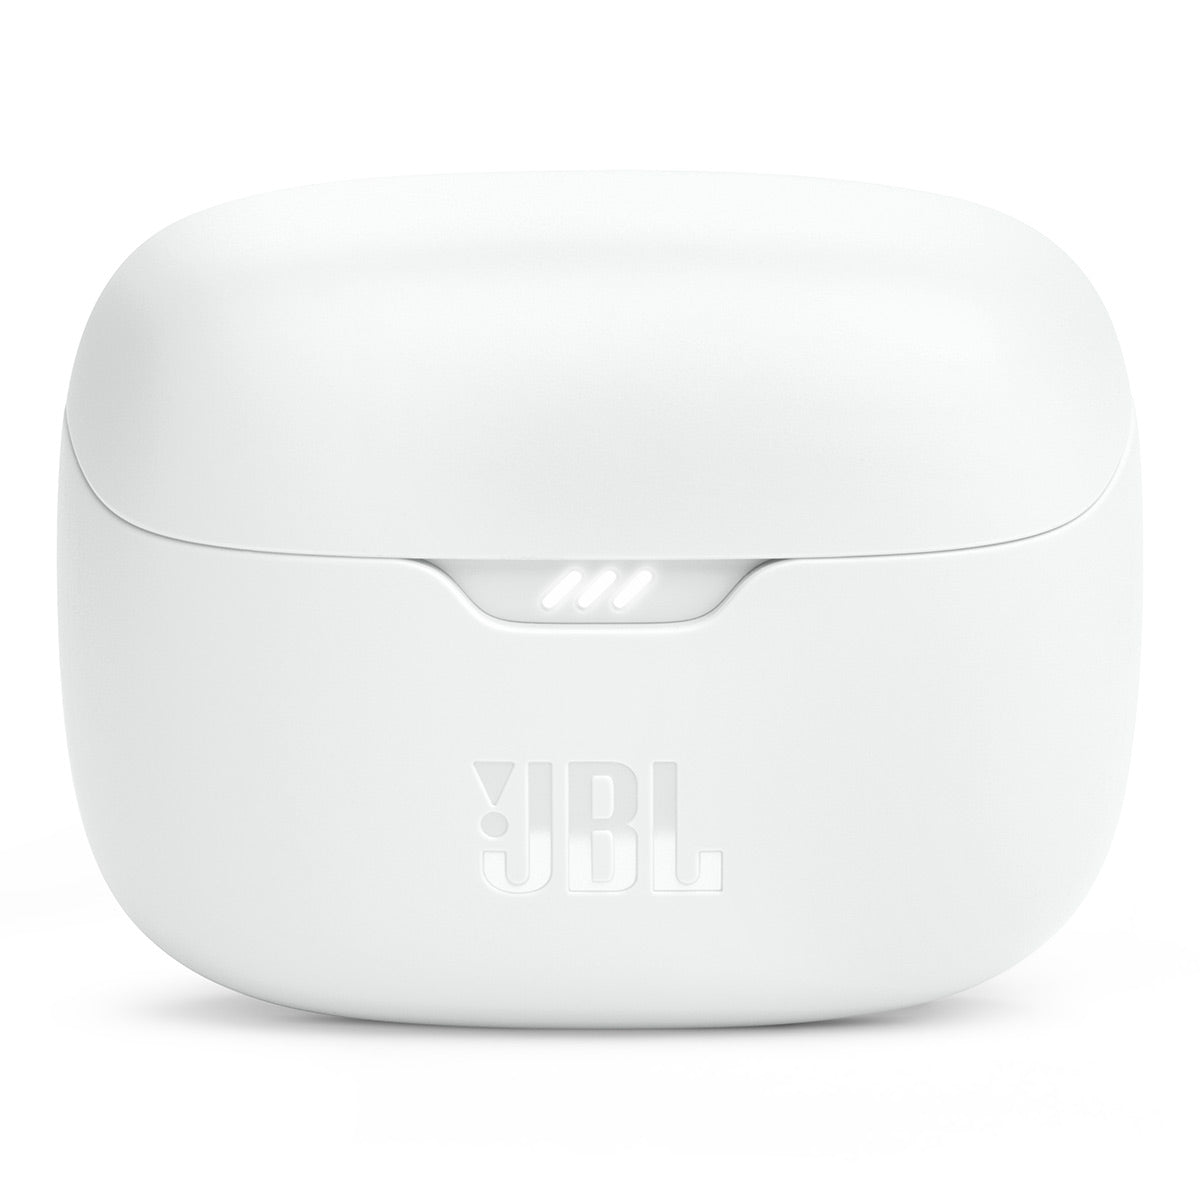 JBL Tune Buds True Wireless Noise Cancelling Earbuds with Bluetooth 5.3 (White)